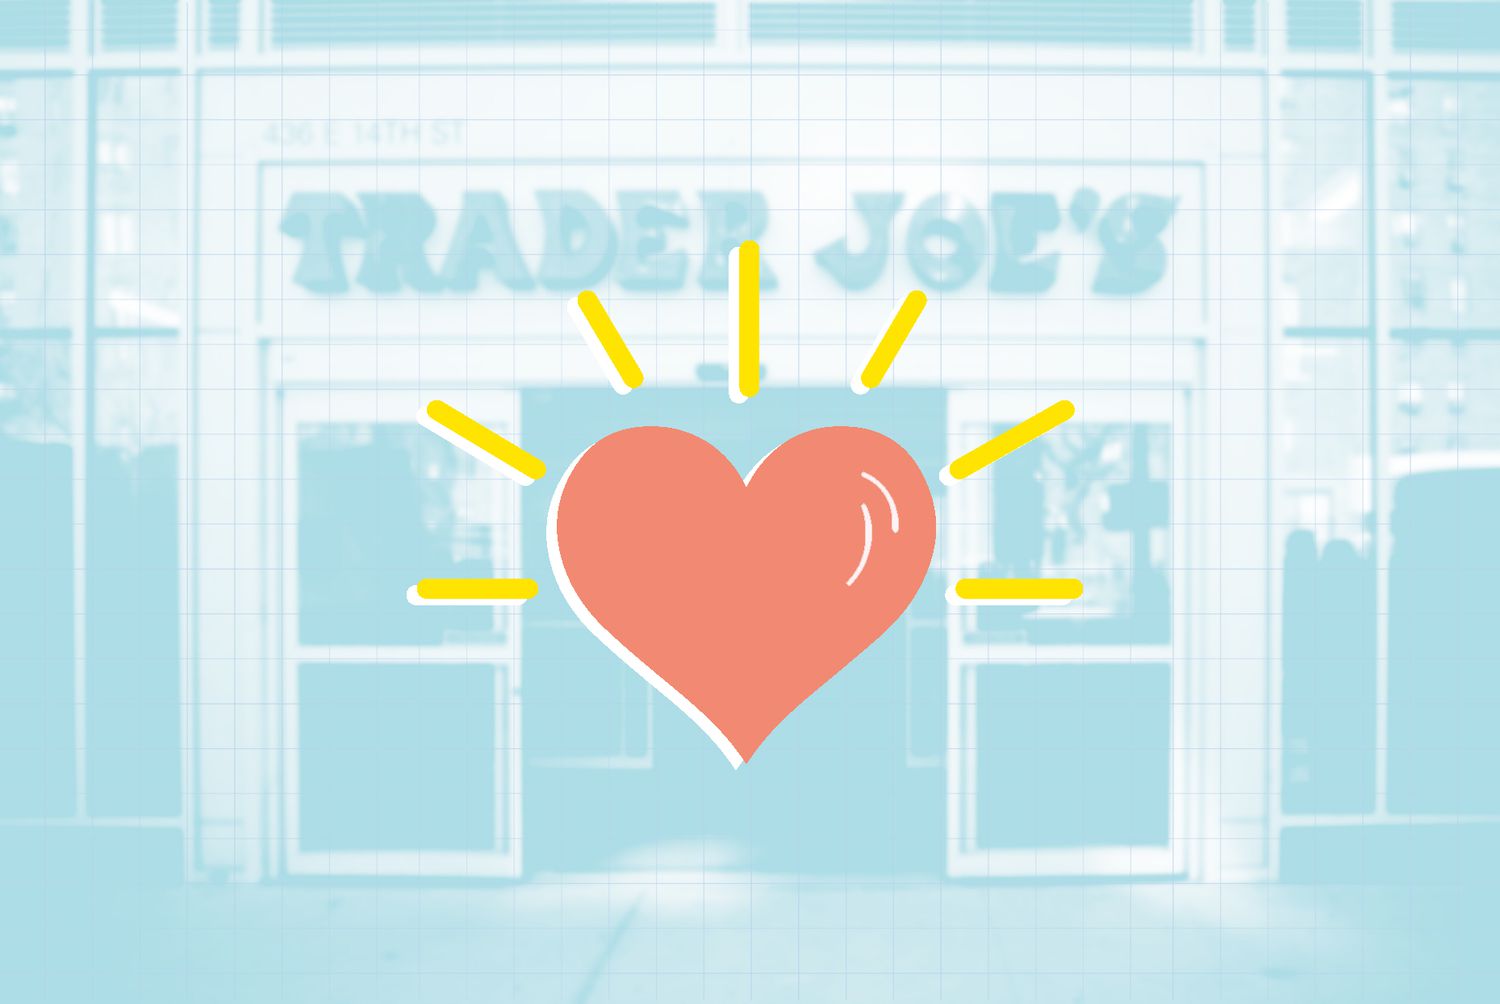 An illustration of a heart on a photo of a trader joe's store front